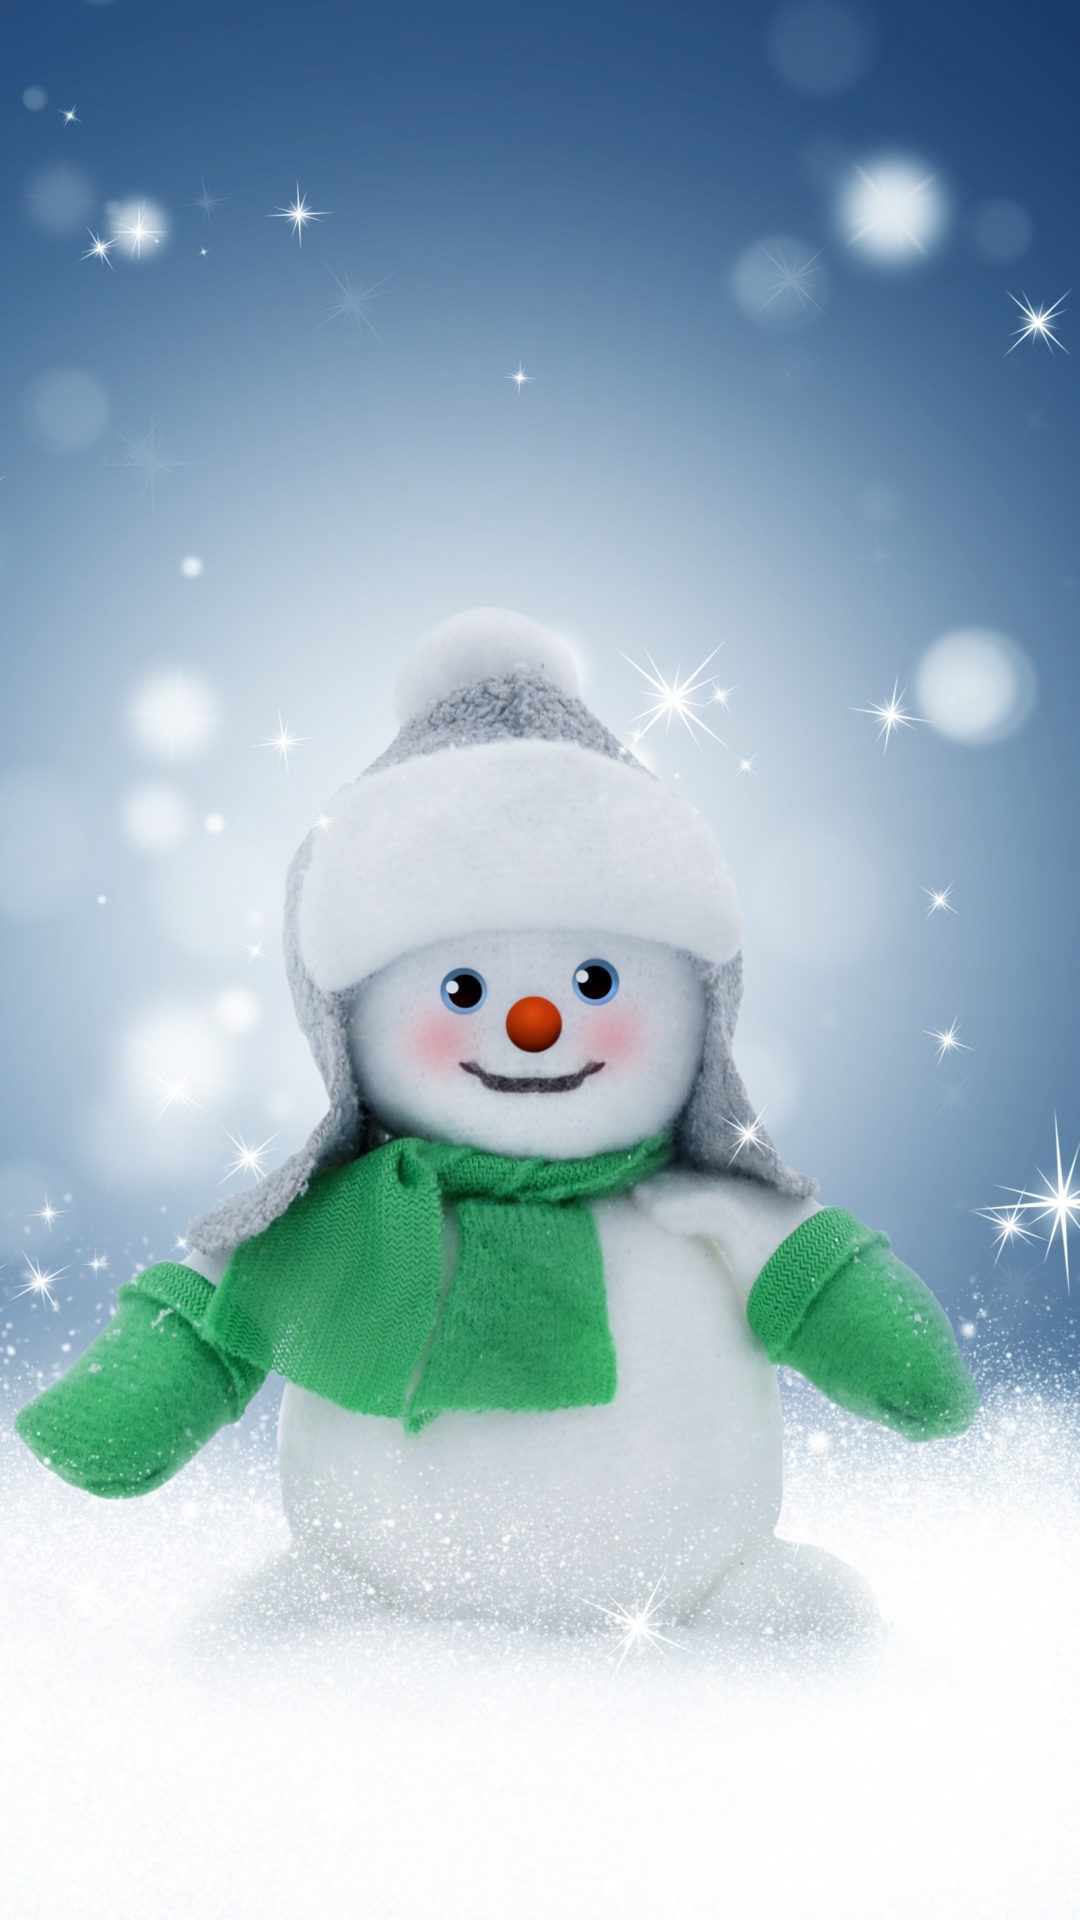 Christmas Day, Snow, Winter, Snowman, Playing in The Snow. Wallpaper in 1080x1920 Resolution